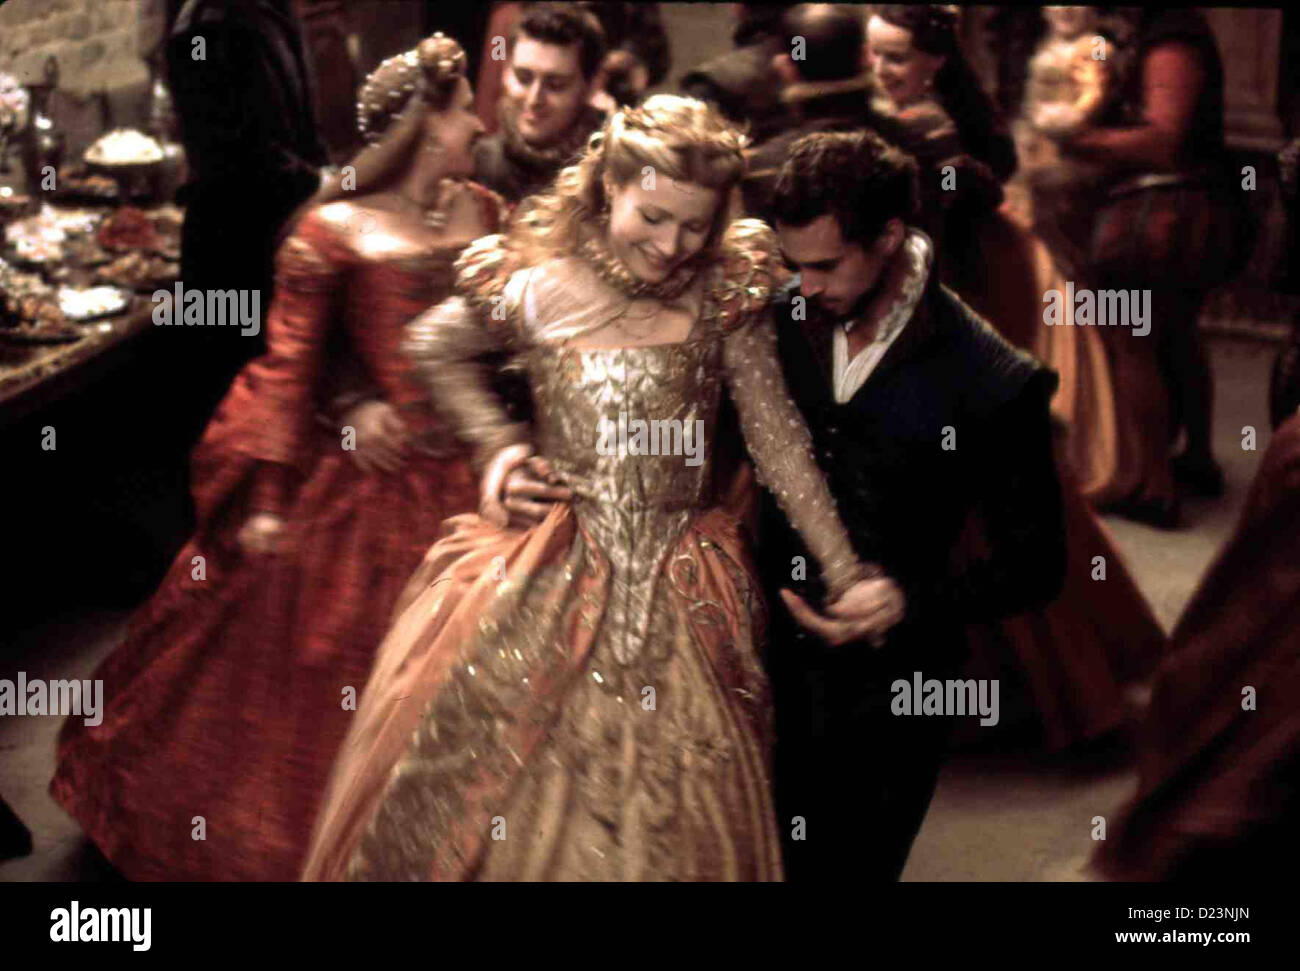 Shakespeare in Love Shakespeare in Love Viola De Lesseps (Gwyneth Paltrow), Will Shakespeare (Joseph Fiennes) *** Les Banque D'Images